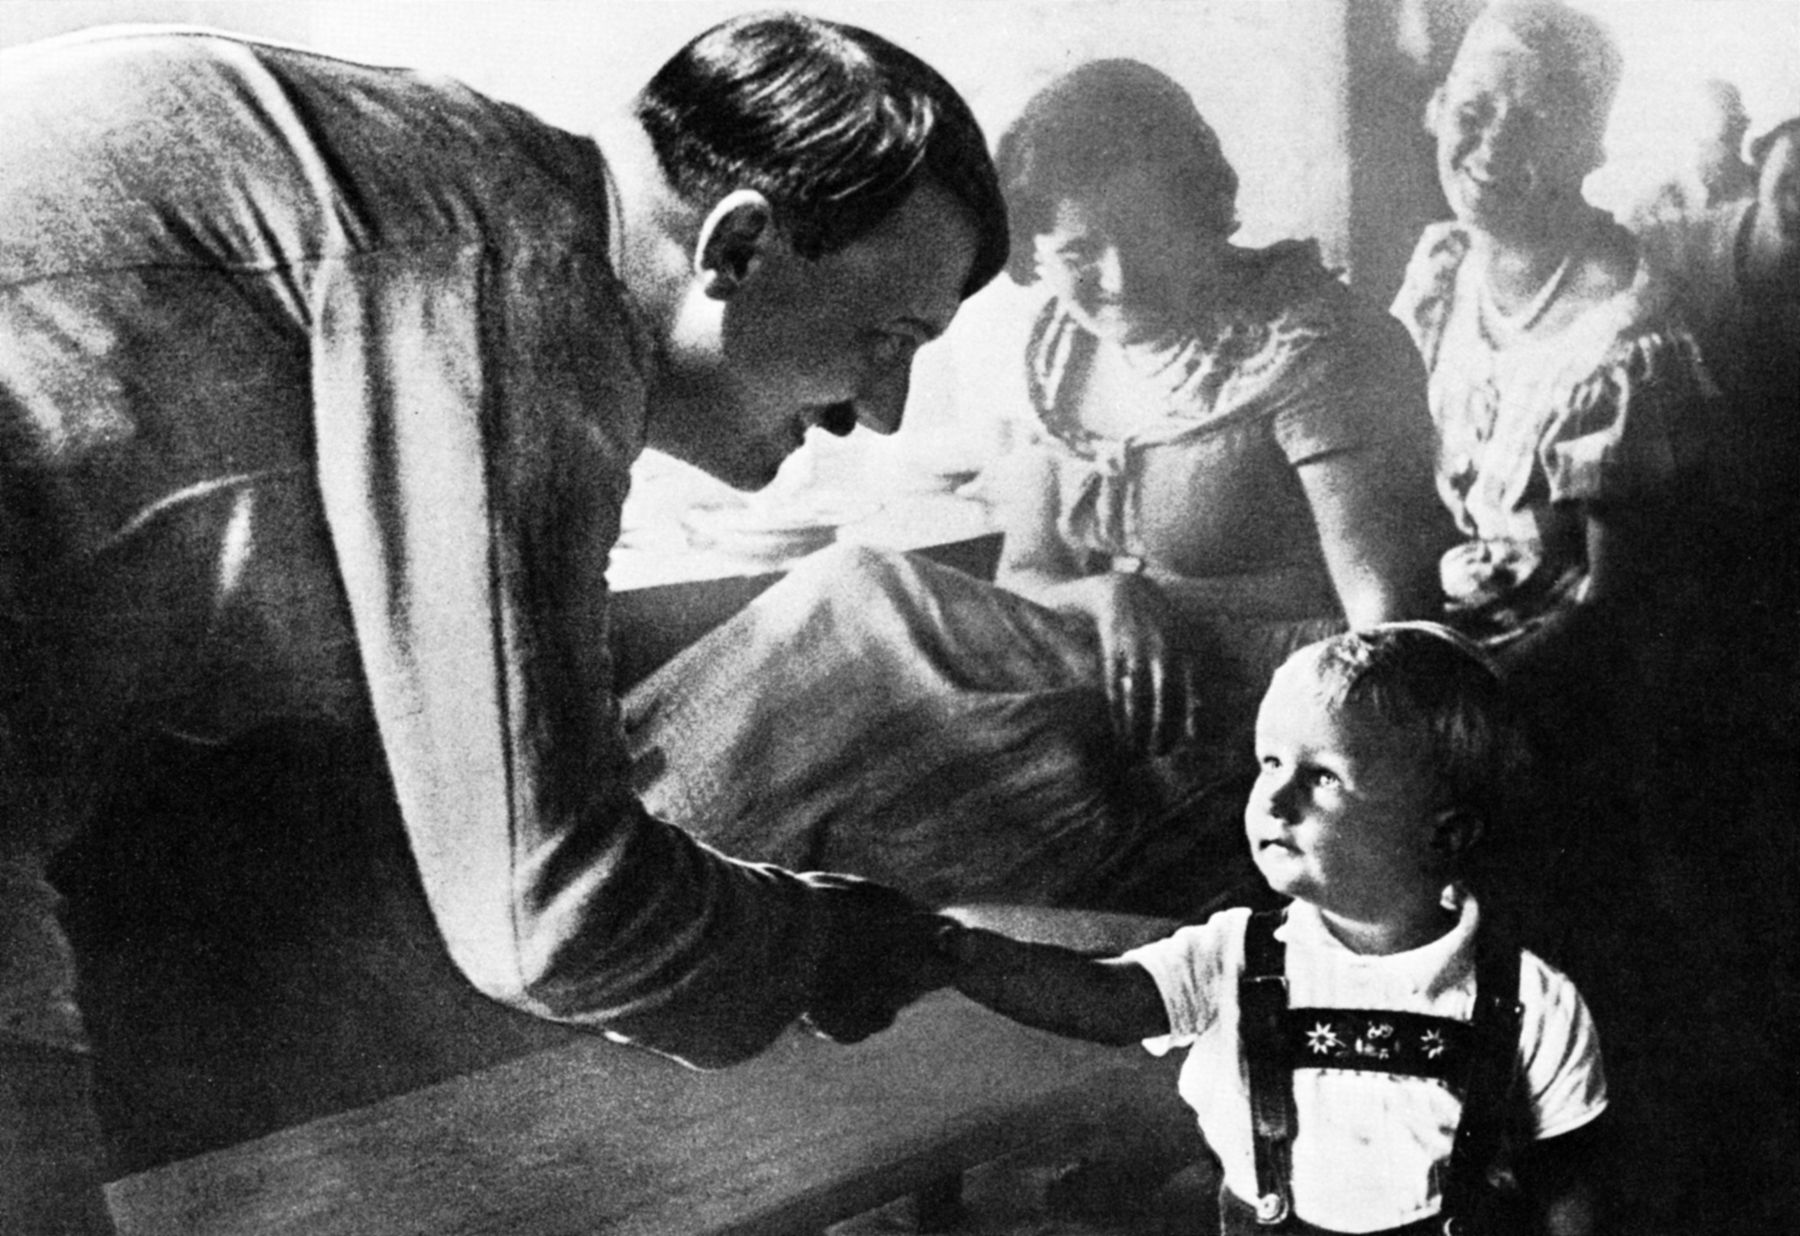 Hitler stoops to greet a wide-eyed German boy wearing native lederhosen in this propaganda photo, which was widely distributed in Germany and abroad.  Note the approving adults seated in the background.